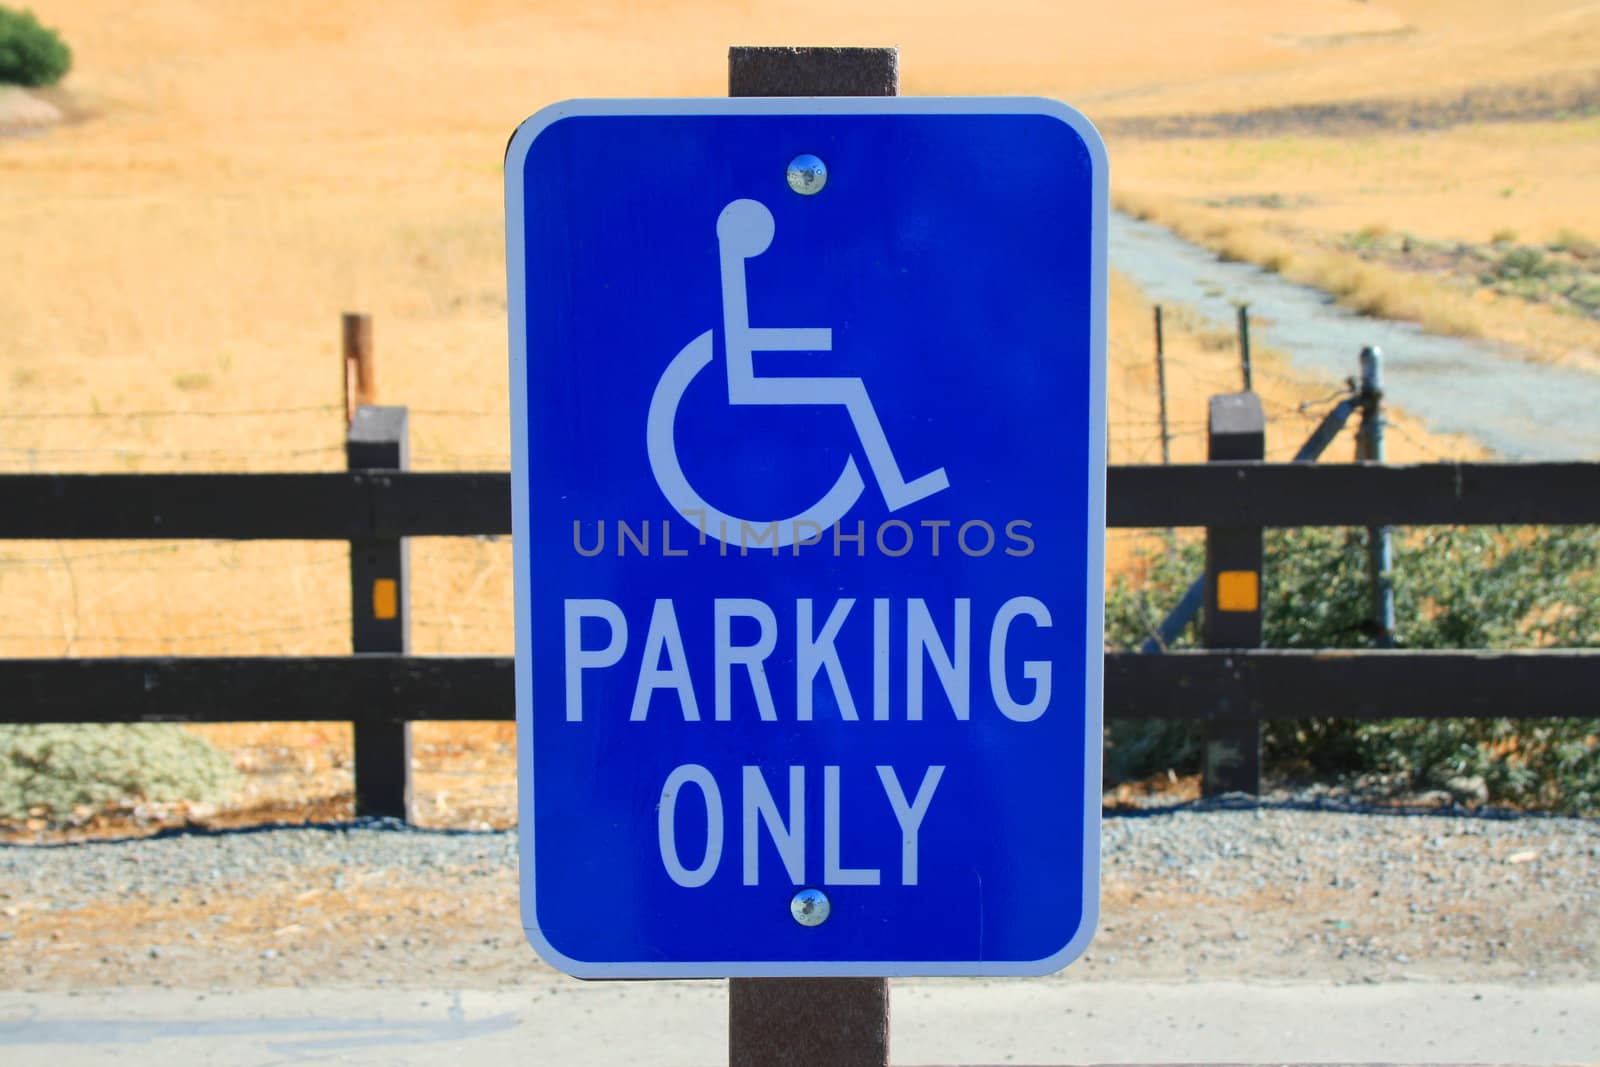 Close up of a disabled parking only sign.
